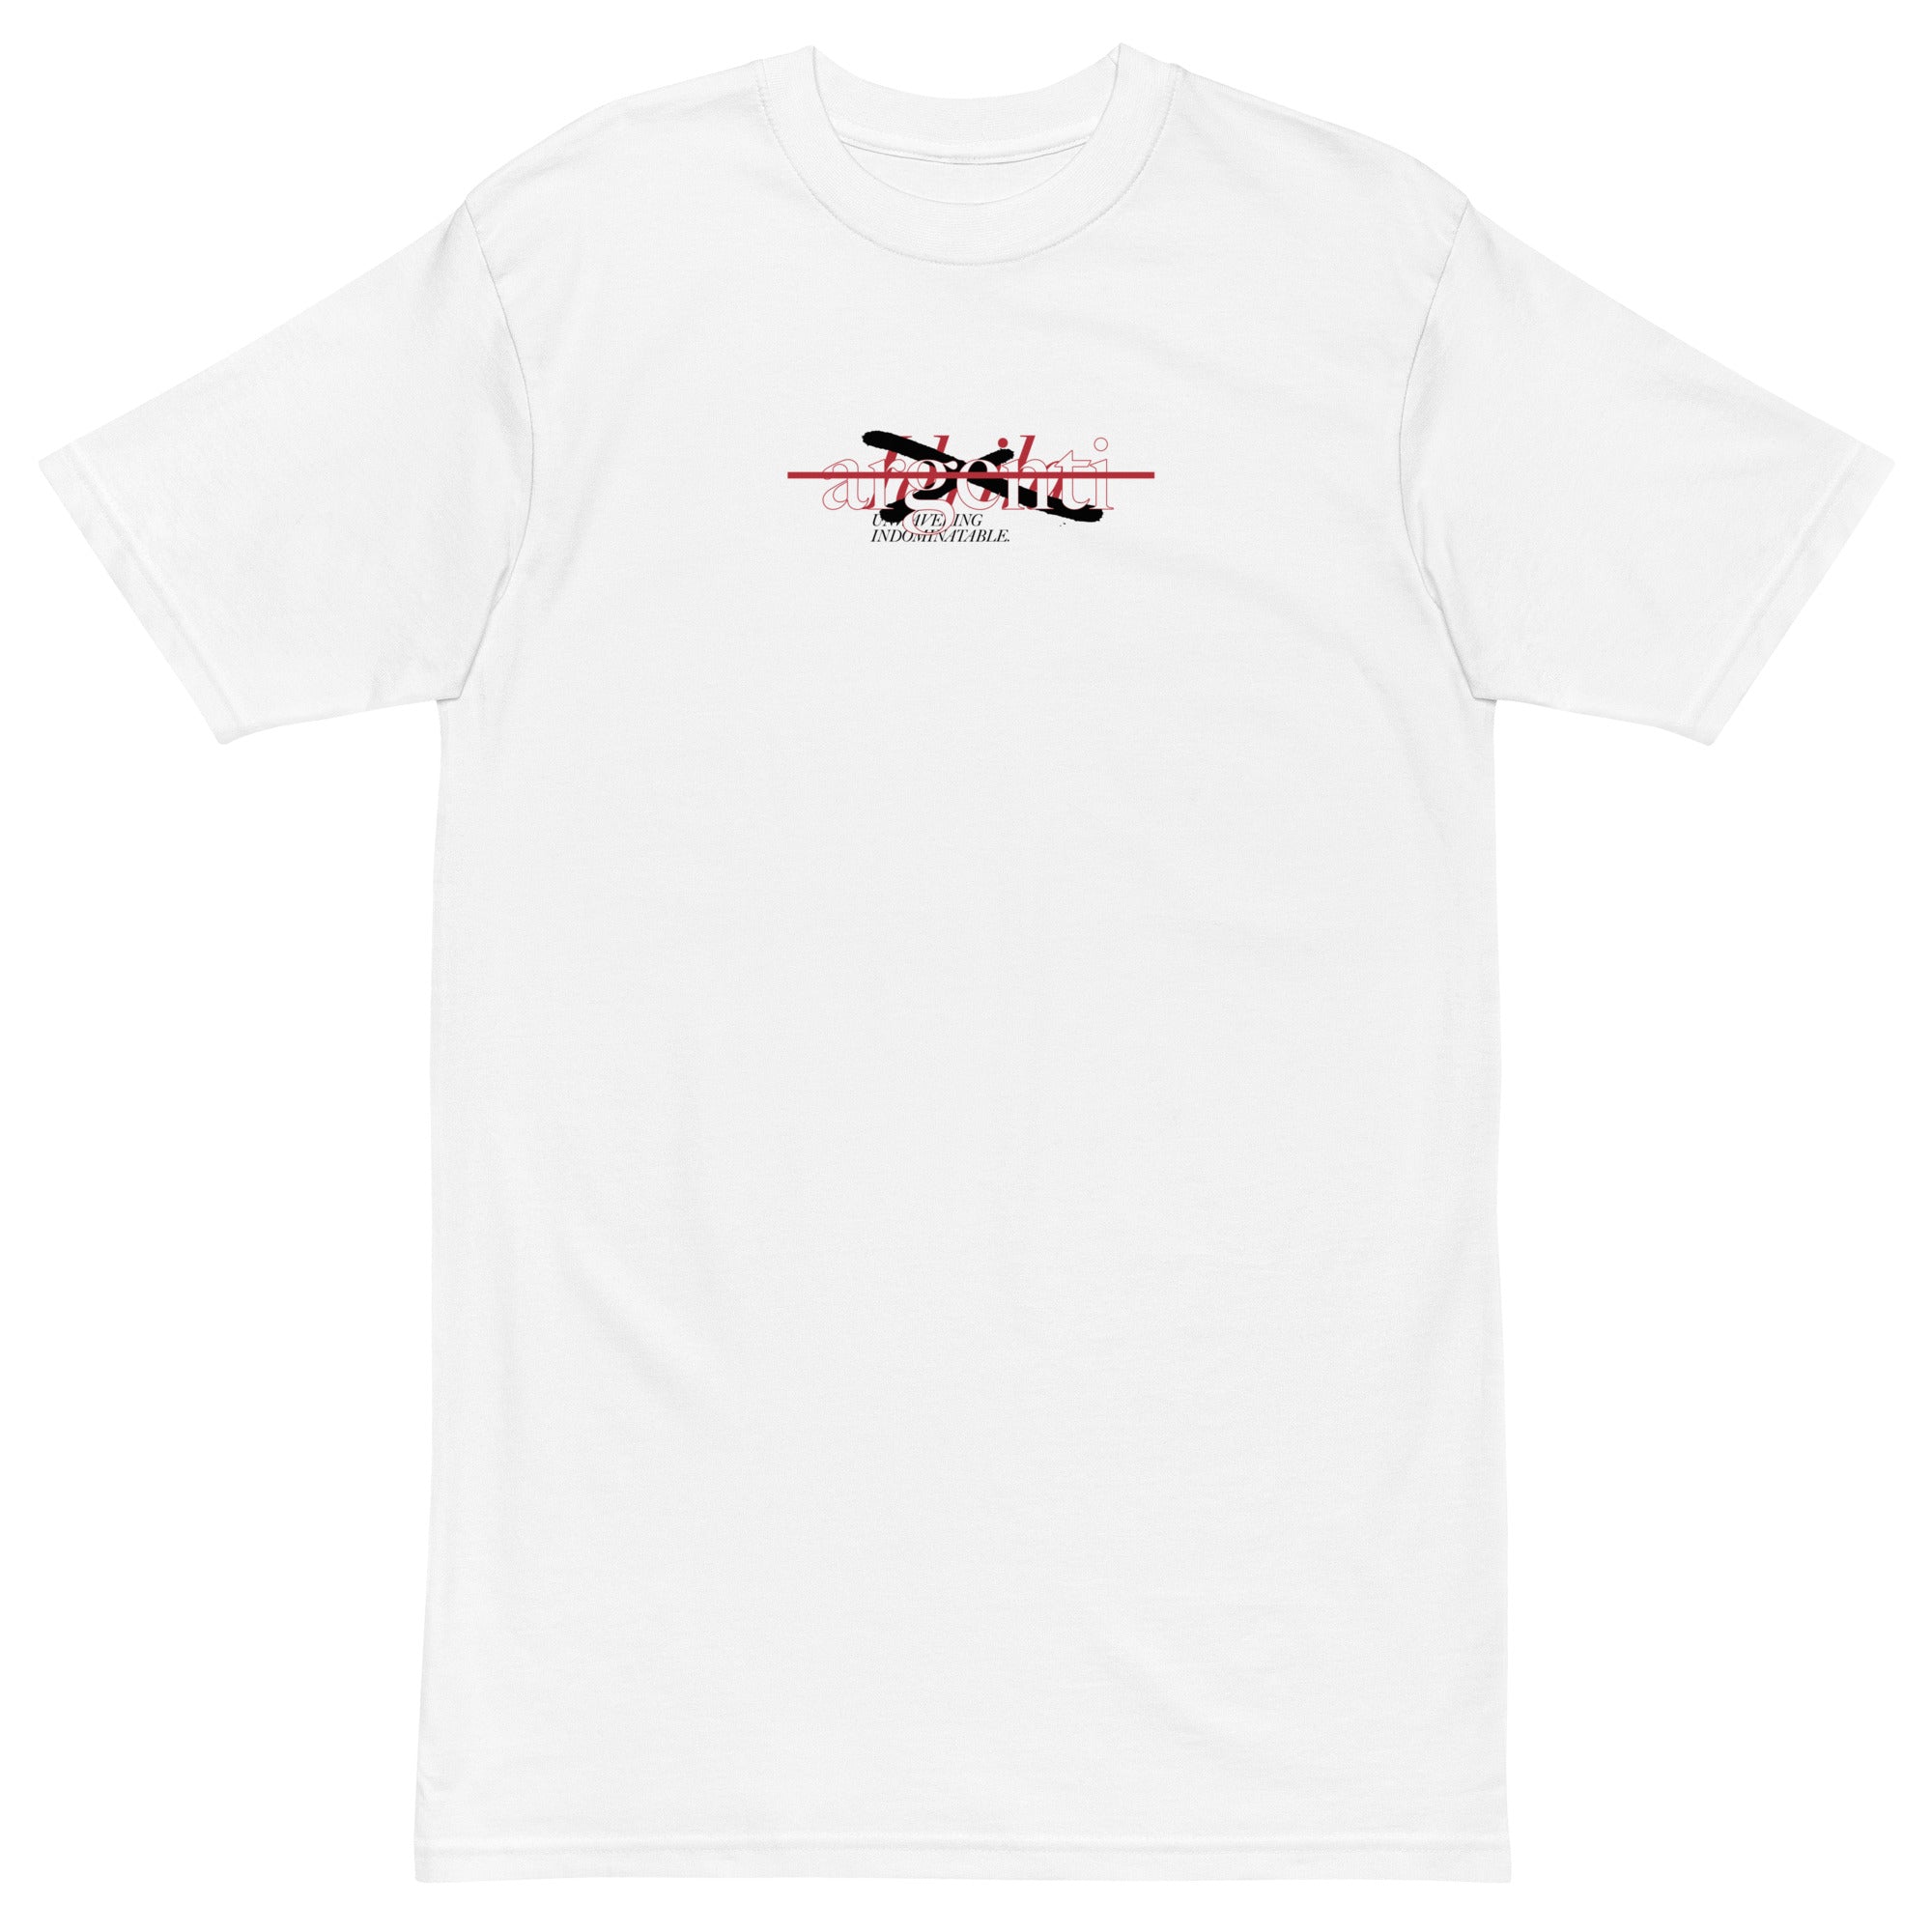 PIETY • t-shirt - Jackler - anime-inspired streetwear - anime clothing